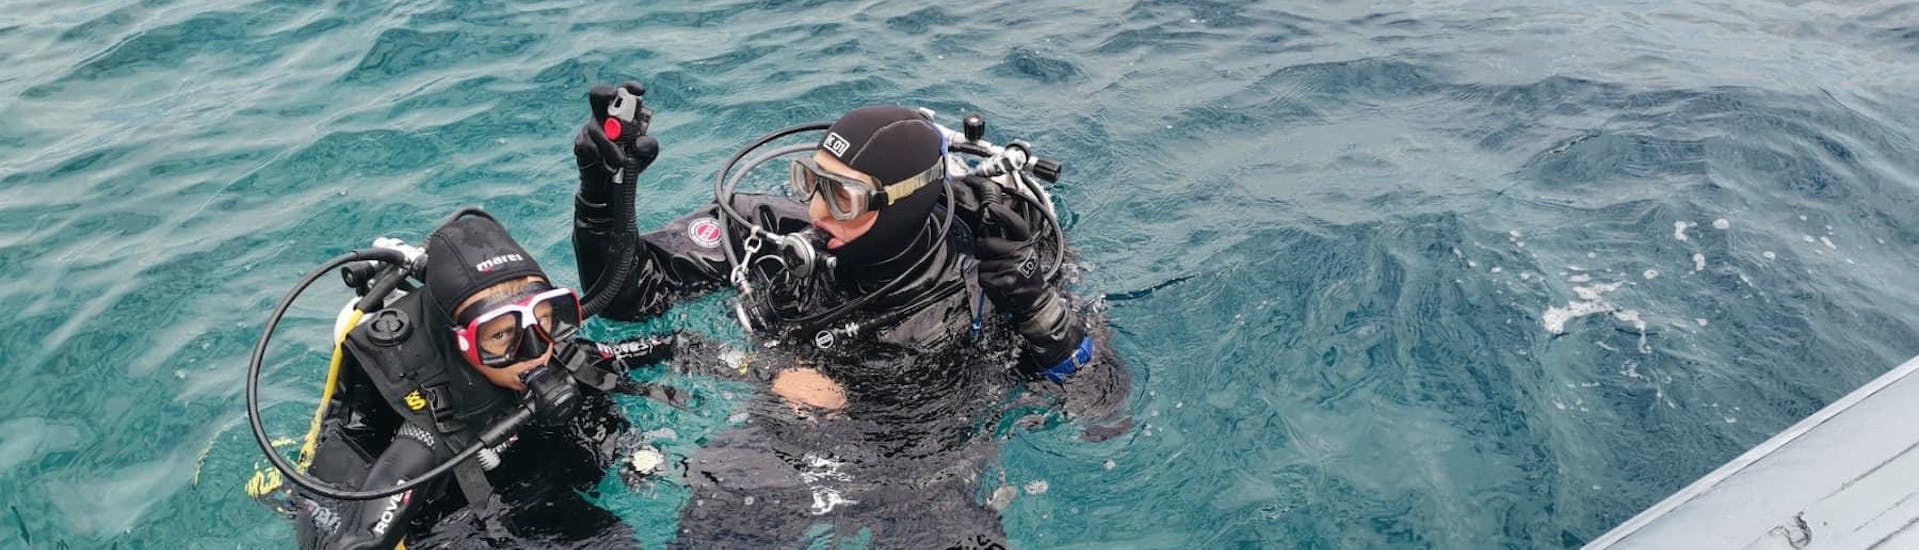 A child and a diving instructor in the water during a dive with Diver Krk.